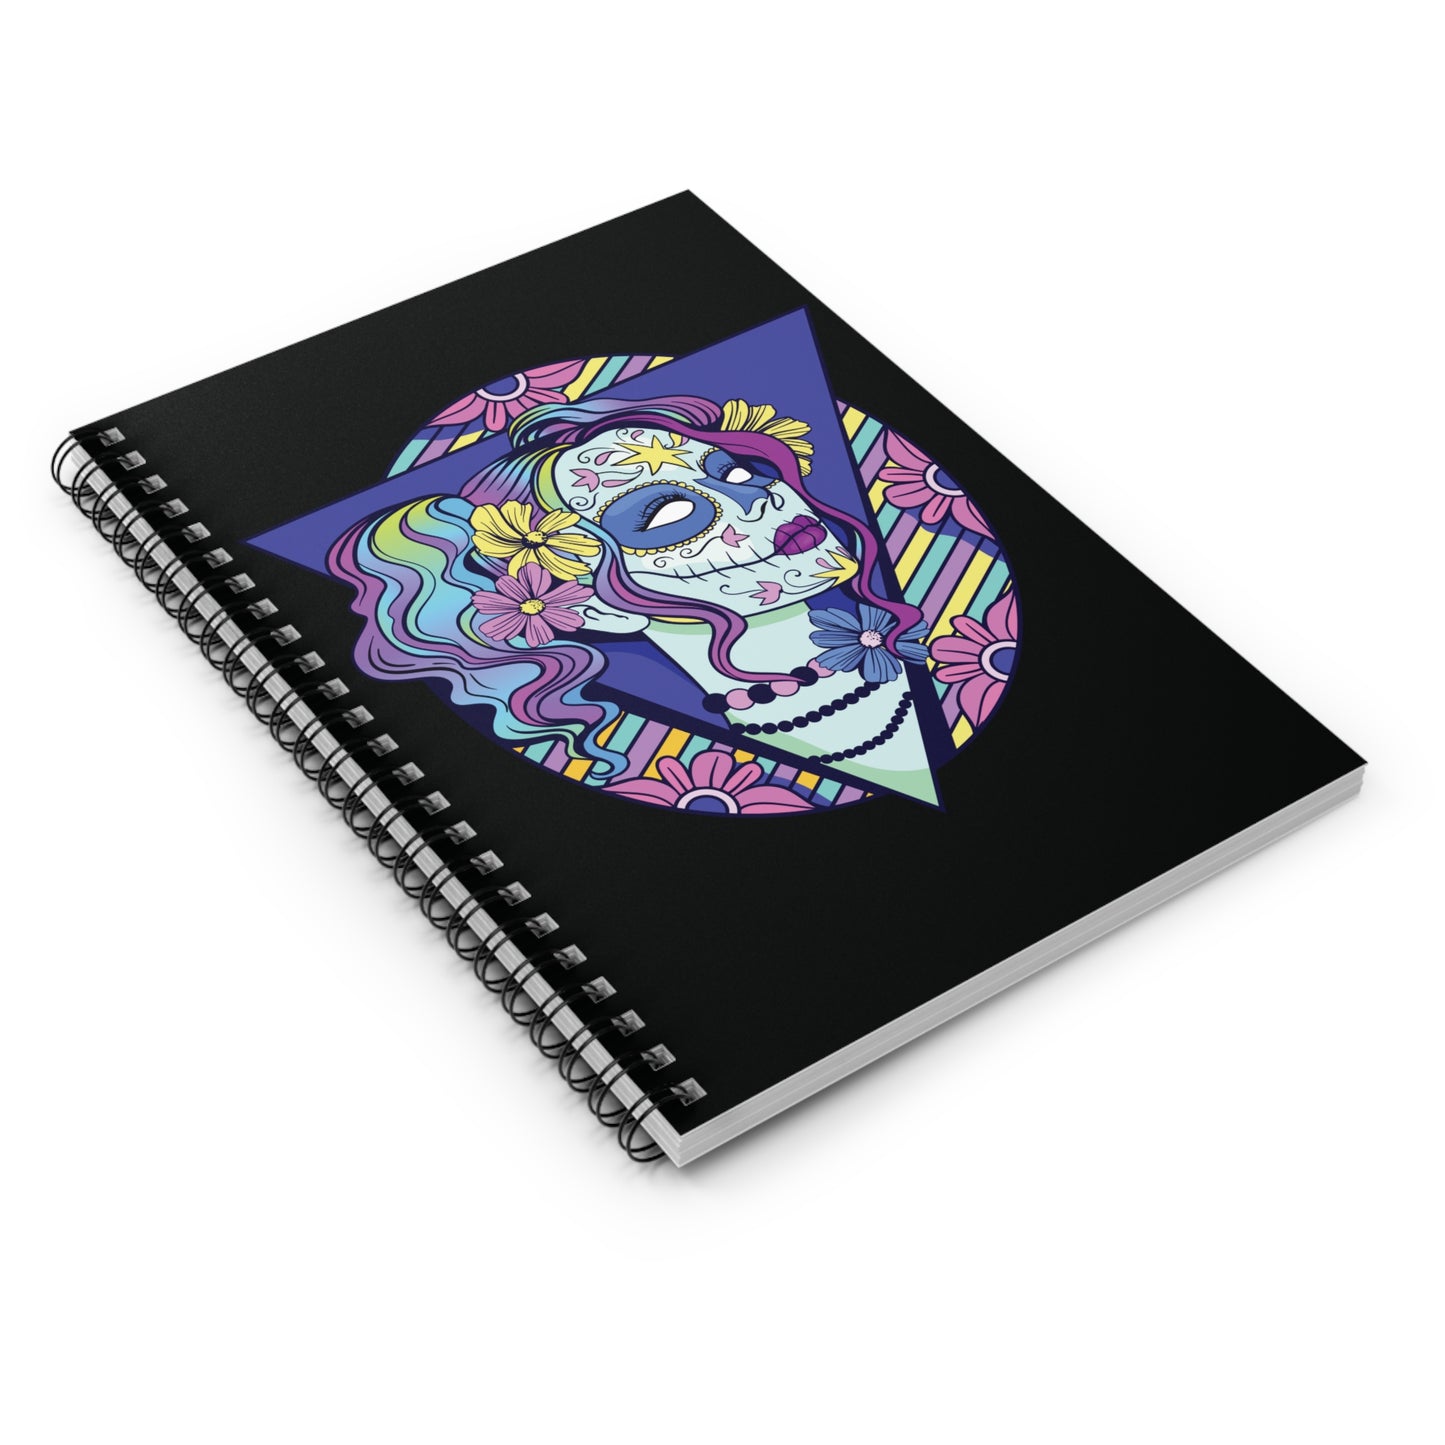 Black Candy Skull: Spiral Notebook - Log Books - Journals - Diaries - and More Custom Printed by TheGlassyLass